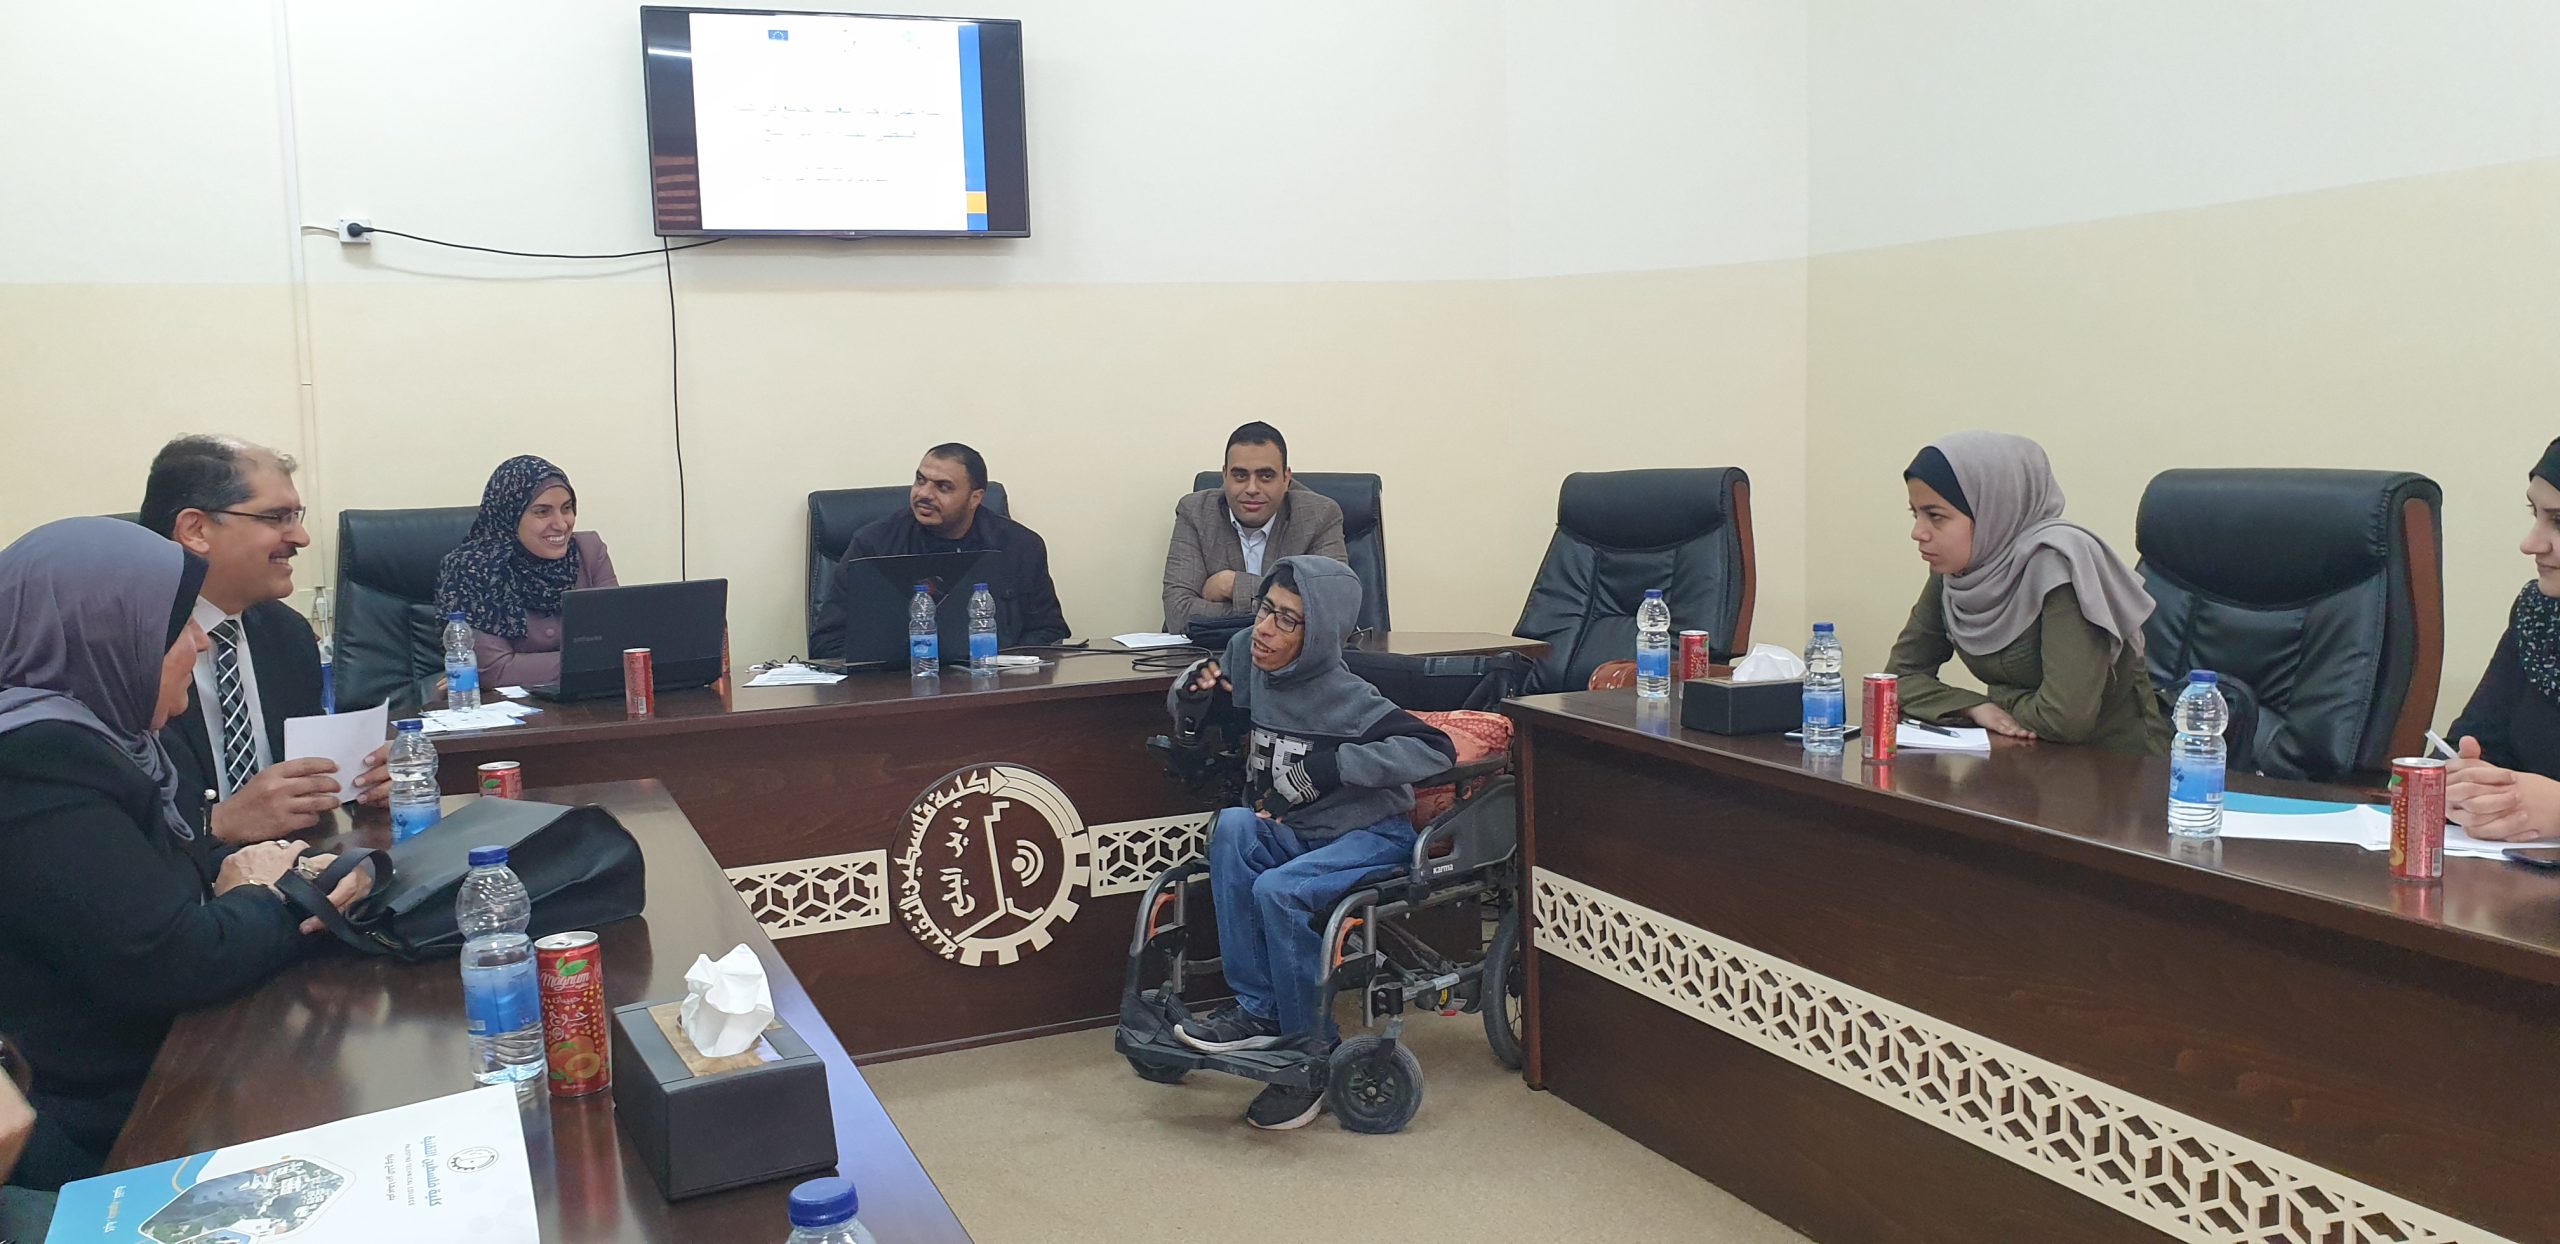 PTC organizes a workshop Dr. Mohamed Elnaggar with student special needs